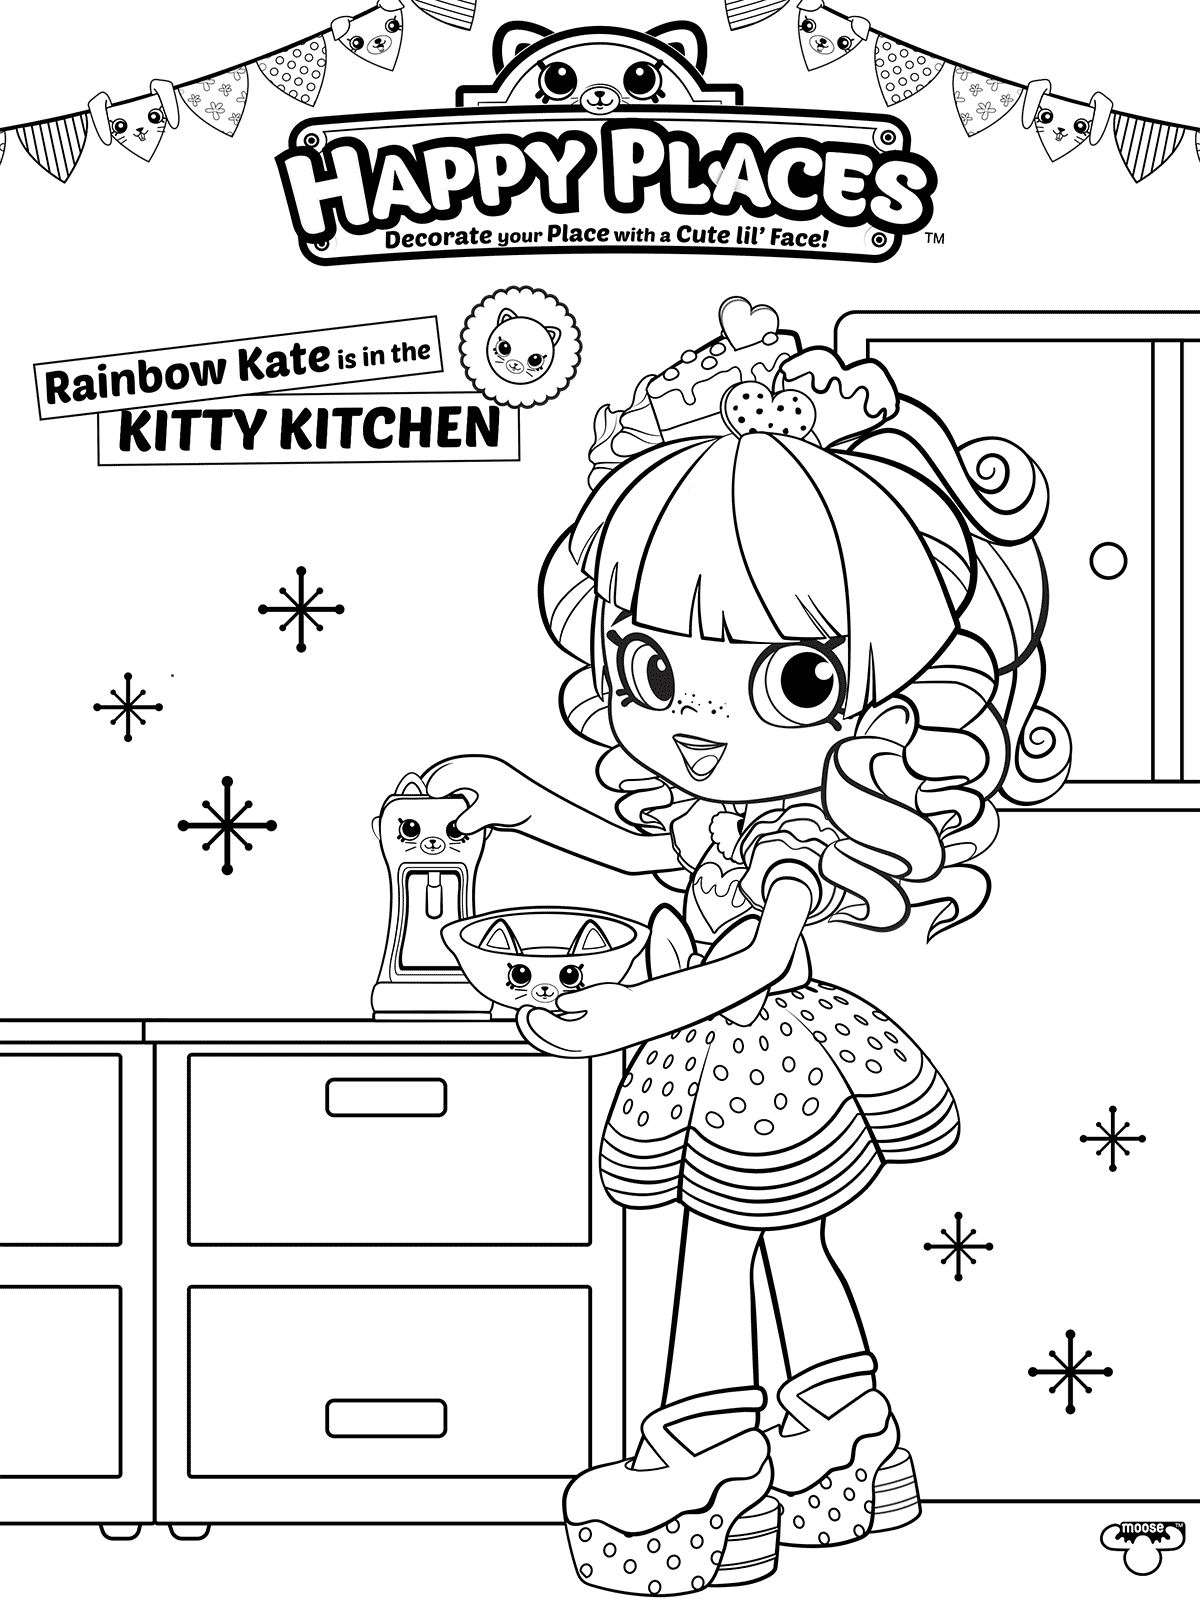 Kids-n-fun.com | 53 coloring pages of Shopkins